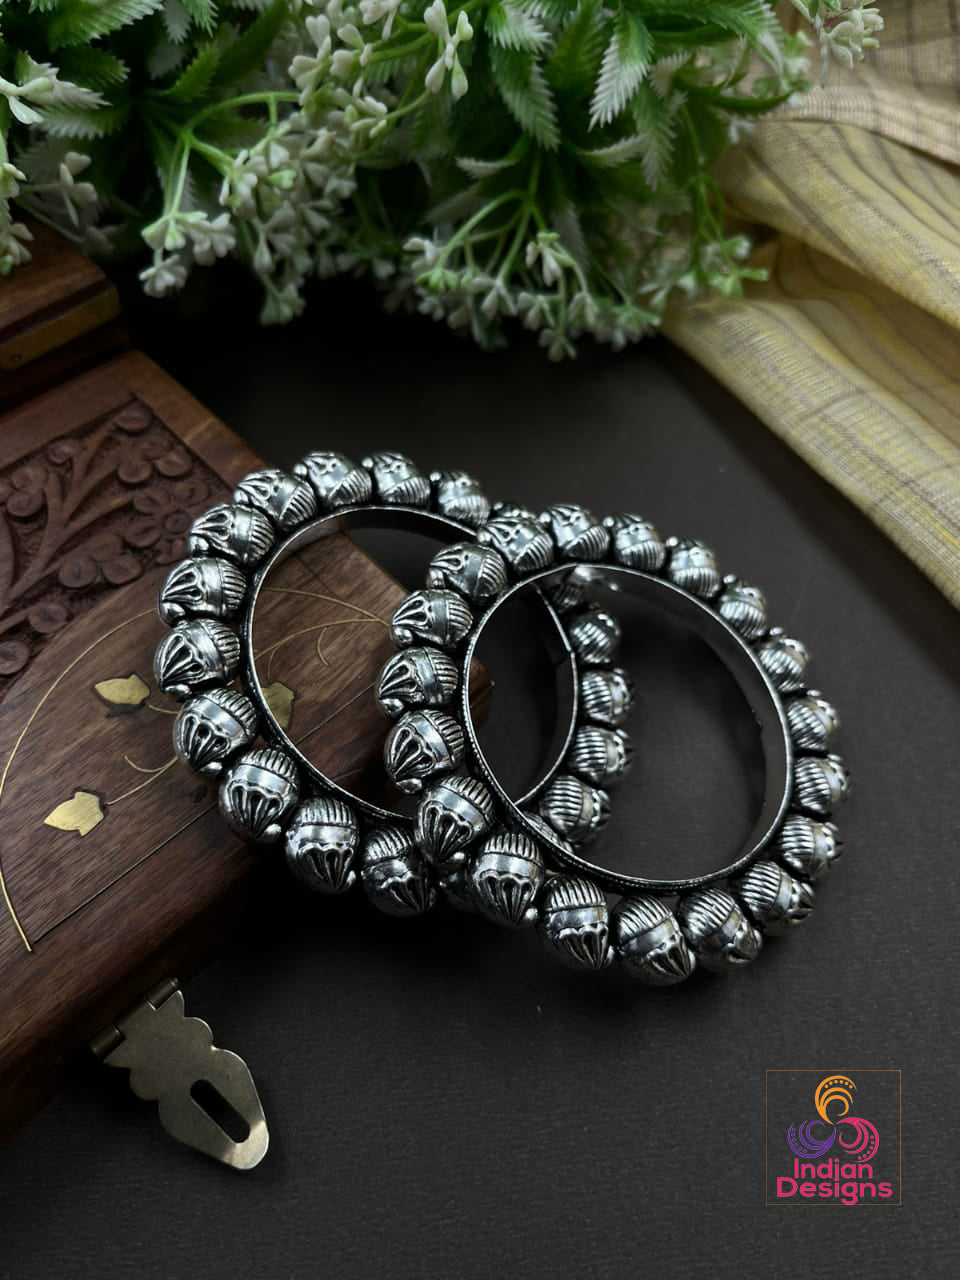 Oxidized Silver bangles with Traditional Indian designs